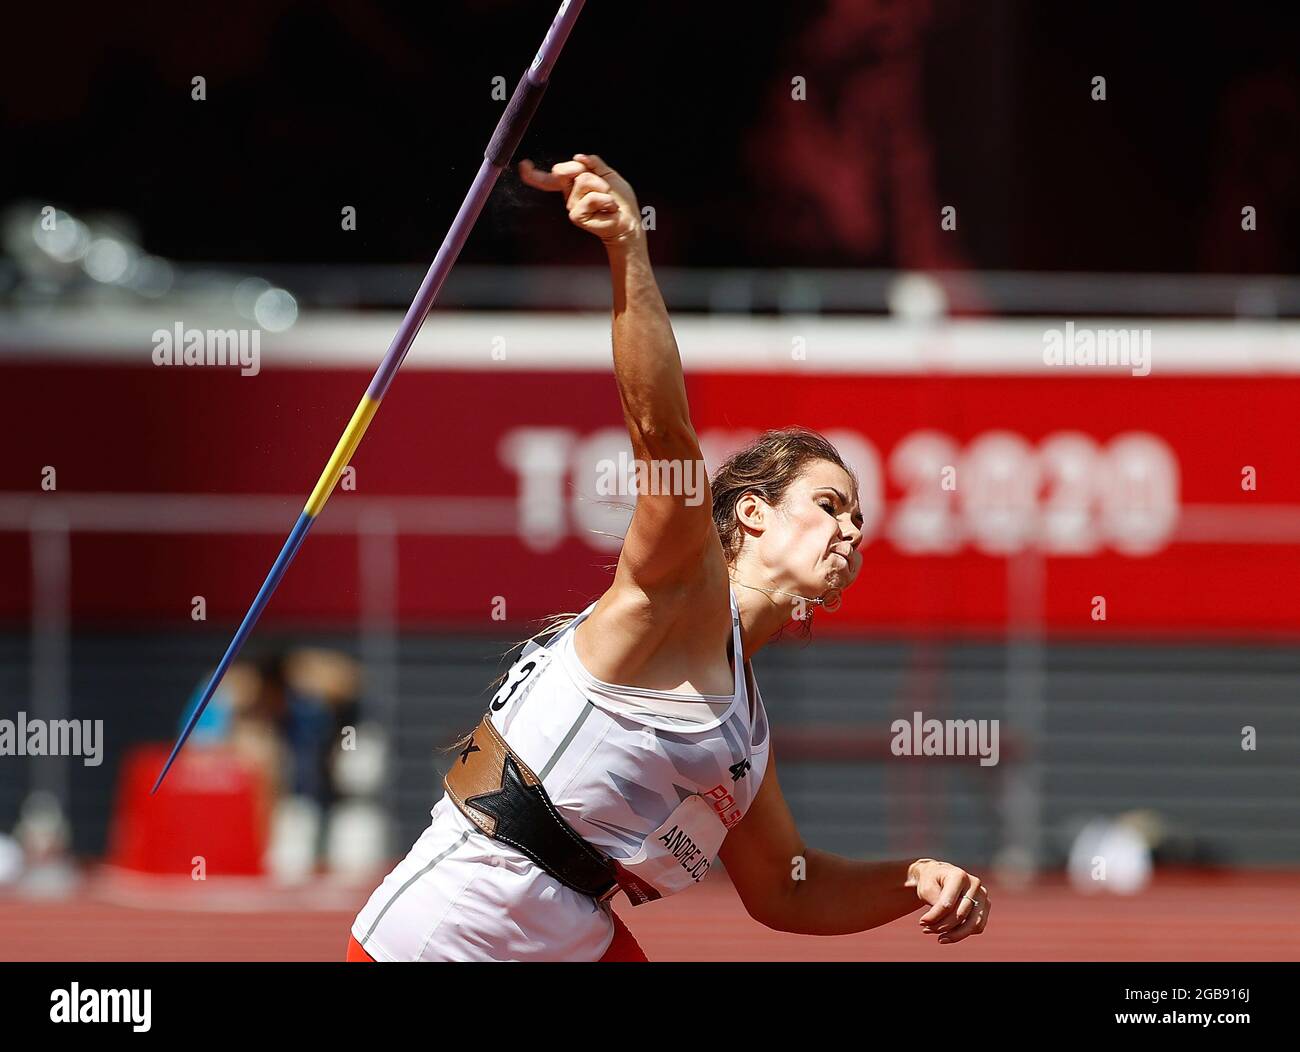 Tokyo, Japan. 3rd Aug, 2021. Maria Andrejczyk of Poland competes during the Women's Javelin Throw Qualification at the Tokyo 2020 Olympic Games in Tokyo, Japan, Aug. 3, 2021. Credit: Wang Lili/Xinhua/Alamy Live News Stock Photo